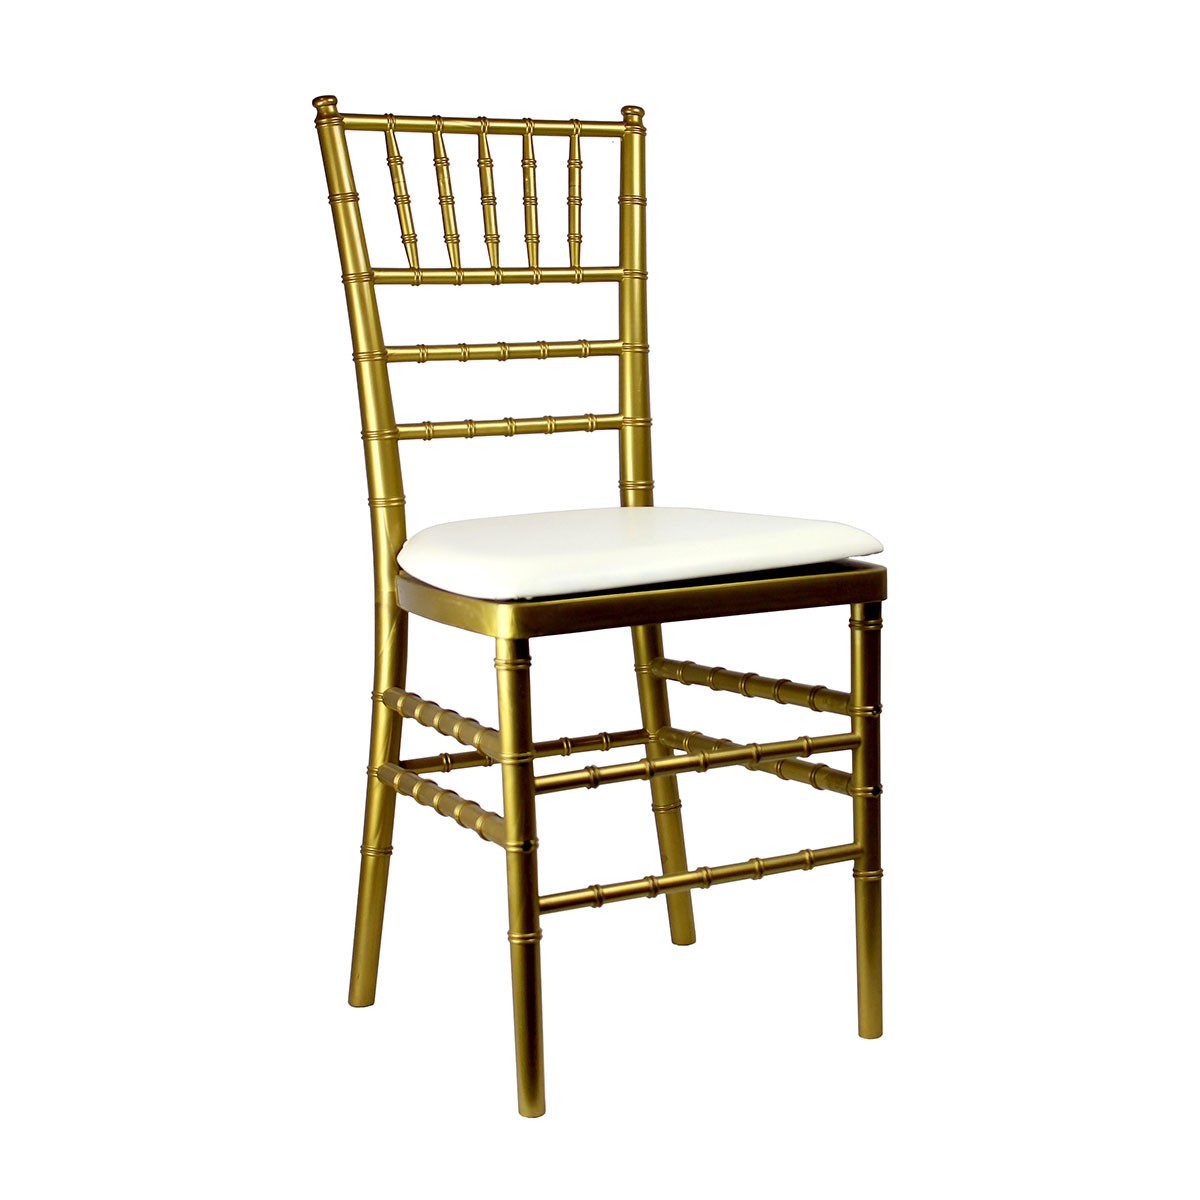 X-Gold Chiavari Resin Chair With Pad (limited qty)